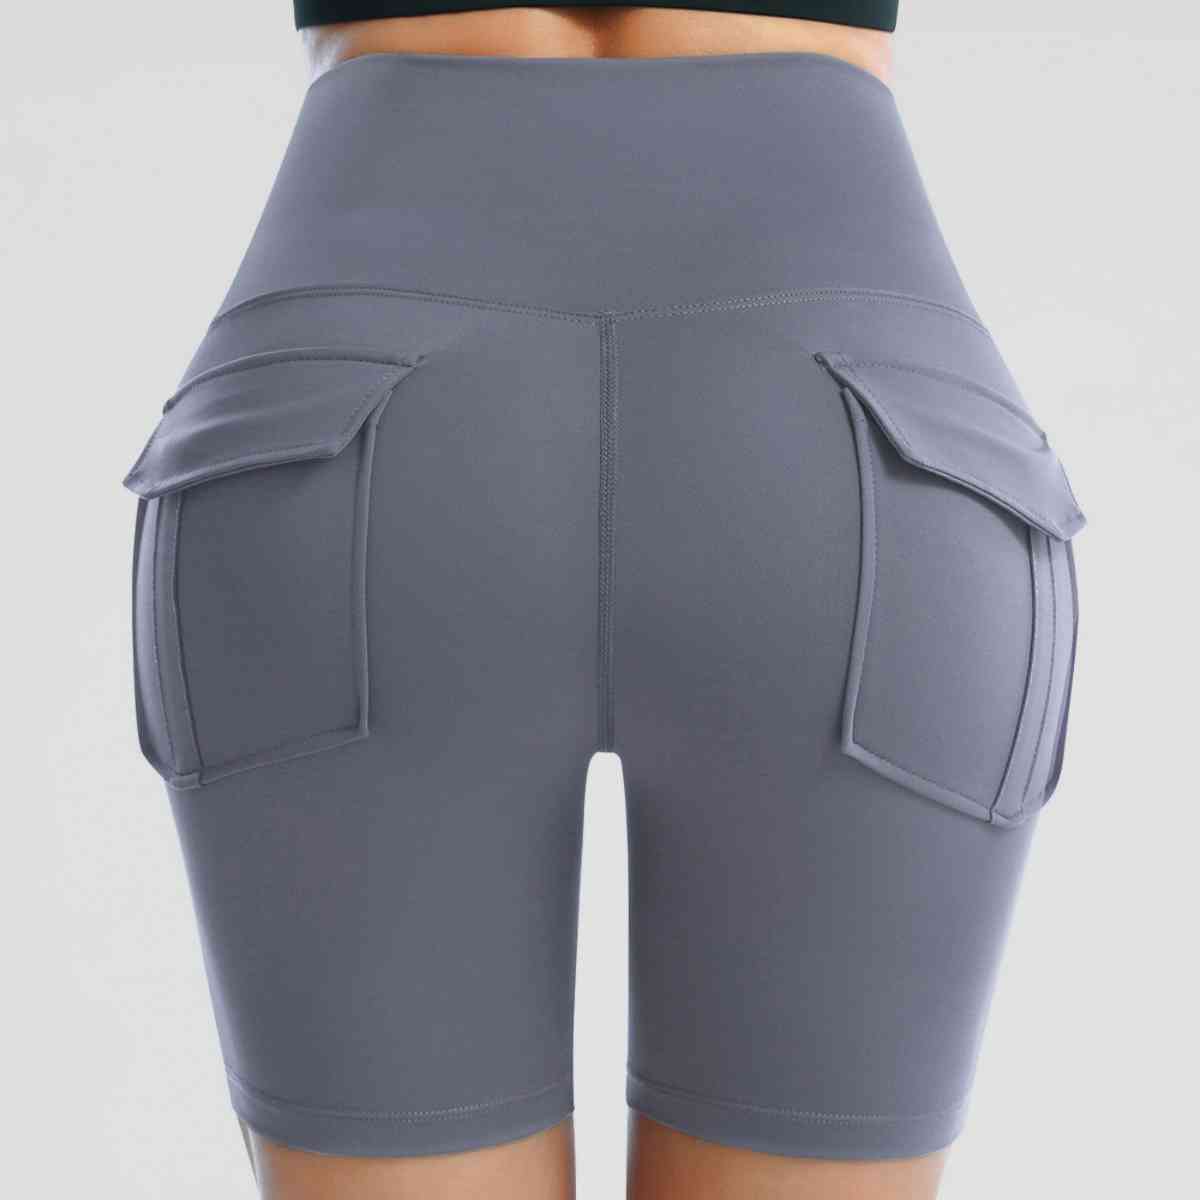 Women's Performance Sports Shorts with Spacious Pockets